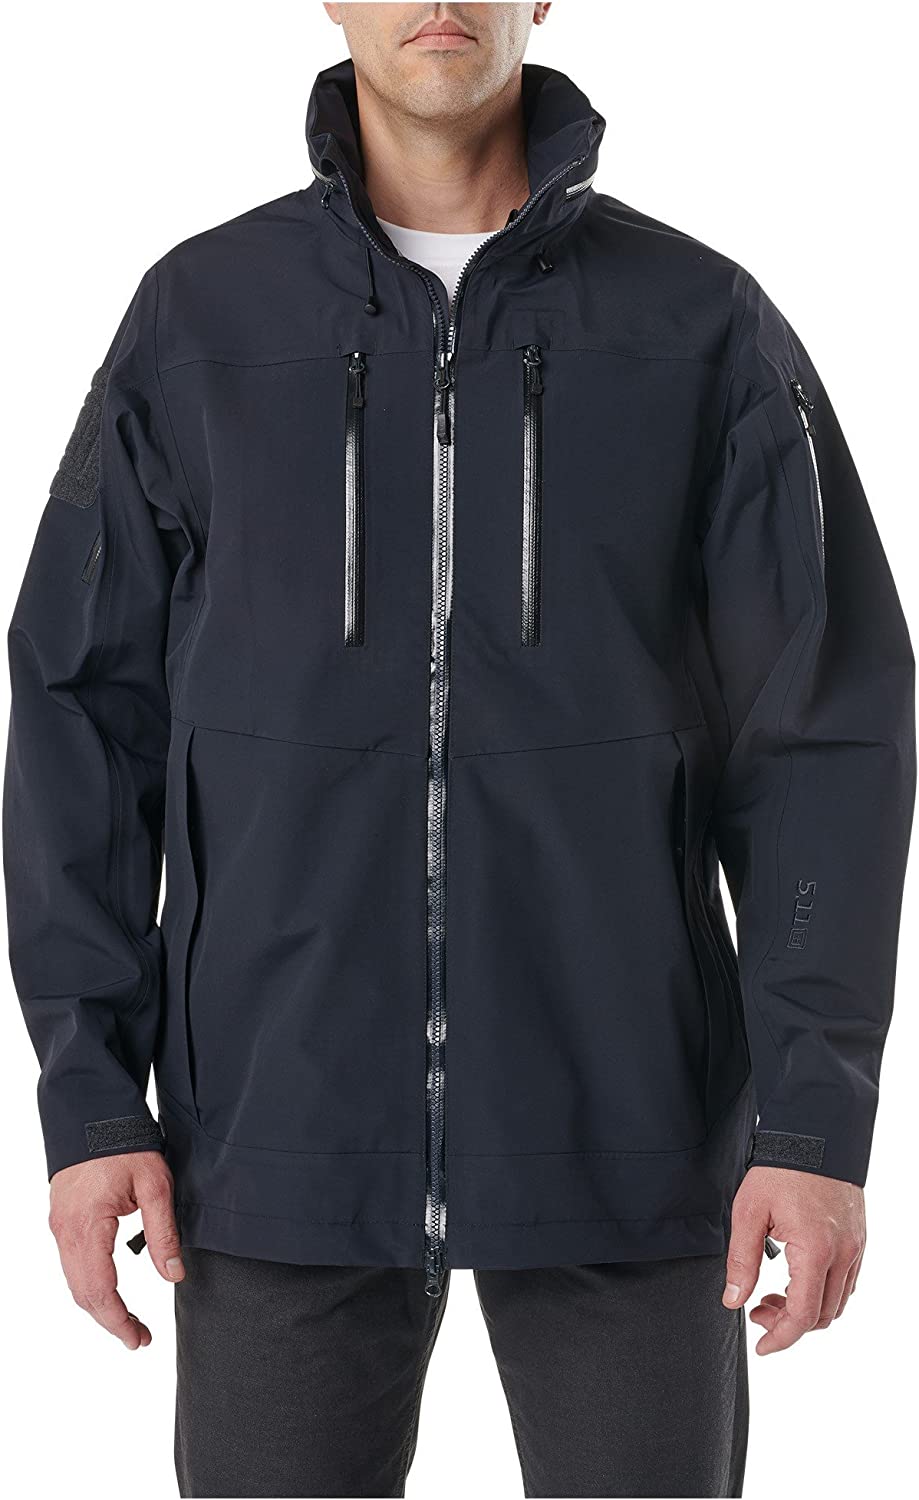 5.11 Tactical Men’s High Performance Approach Jacket, Style 48331, Dark Navy, Small